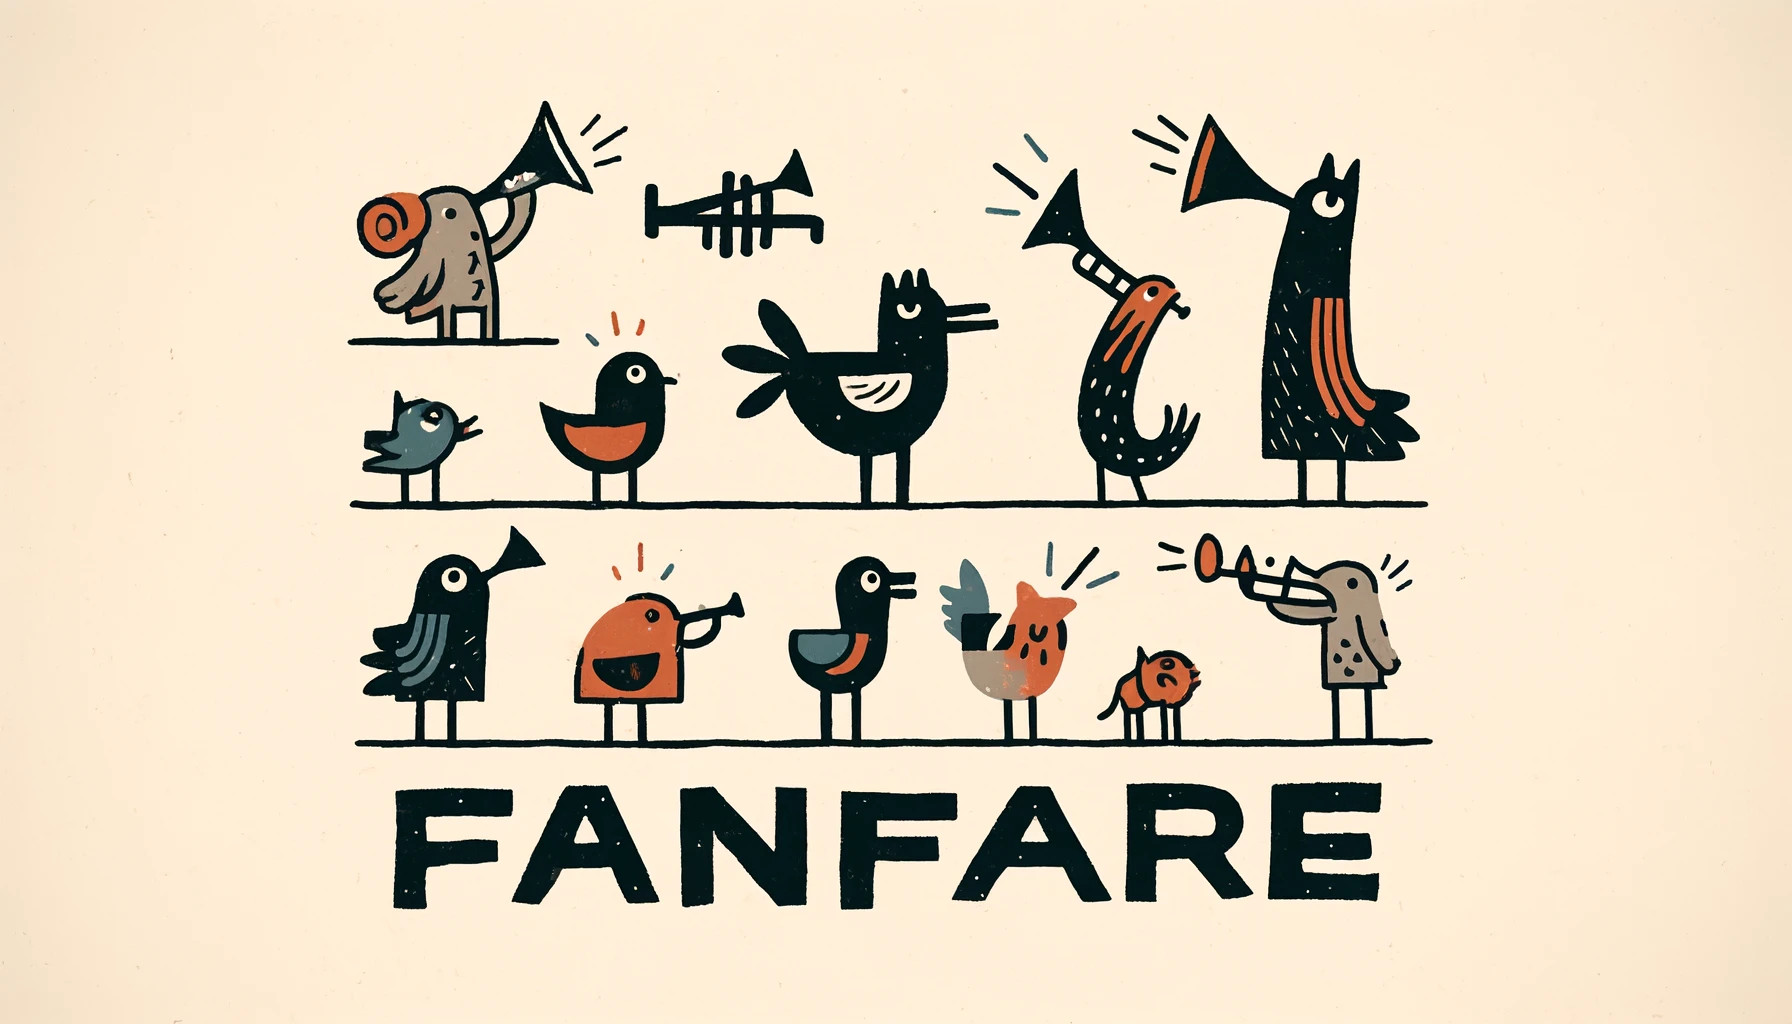 Word of the Day: fanfare